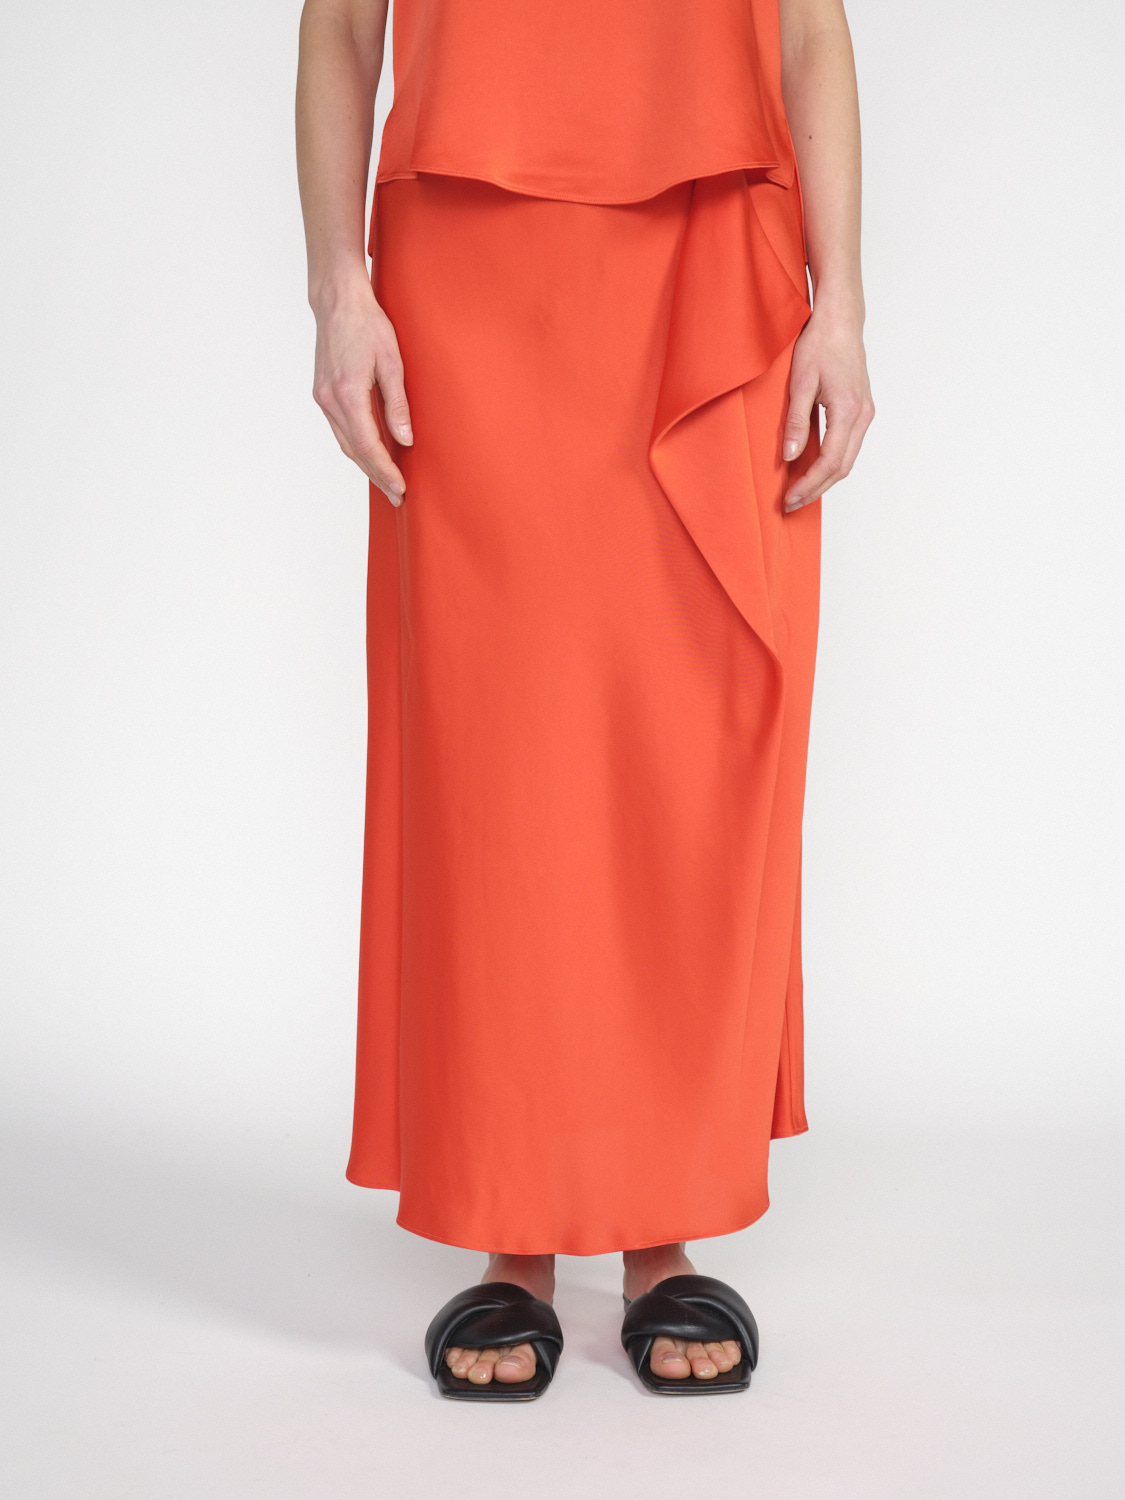 Blane – Skirt with cadcading ruffle detail   